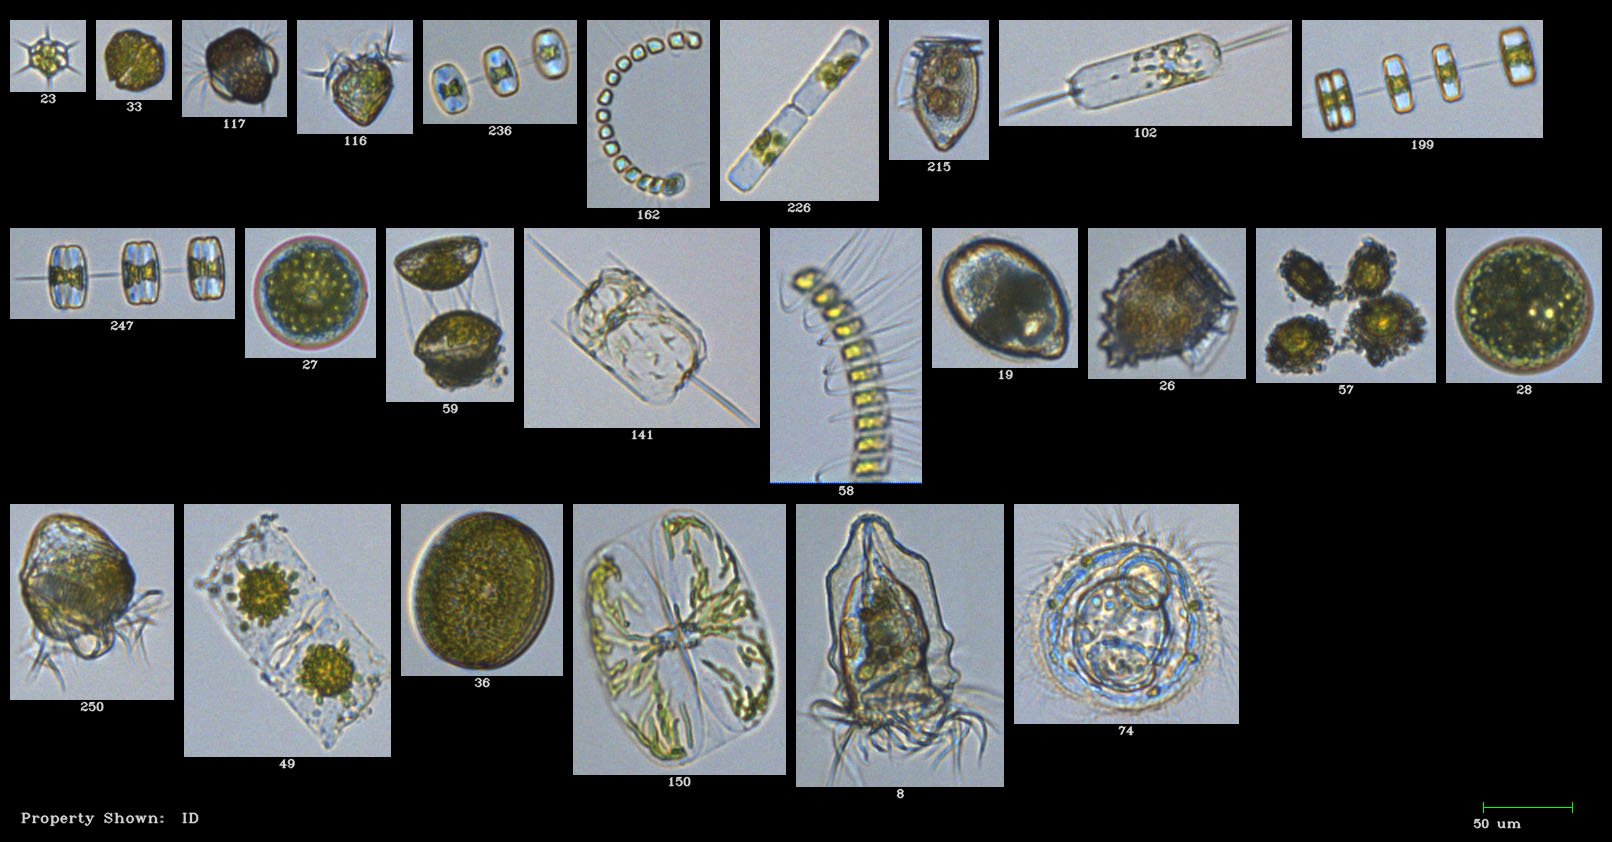 FlowCam Collage of phytoplankton and zooplankton from the Gulf of Maine